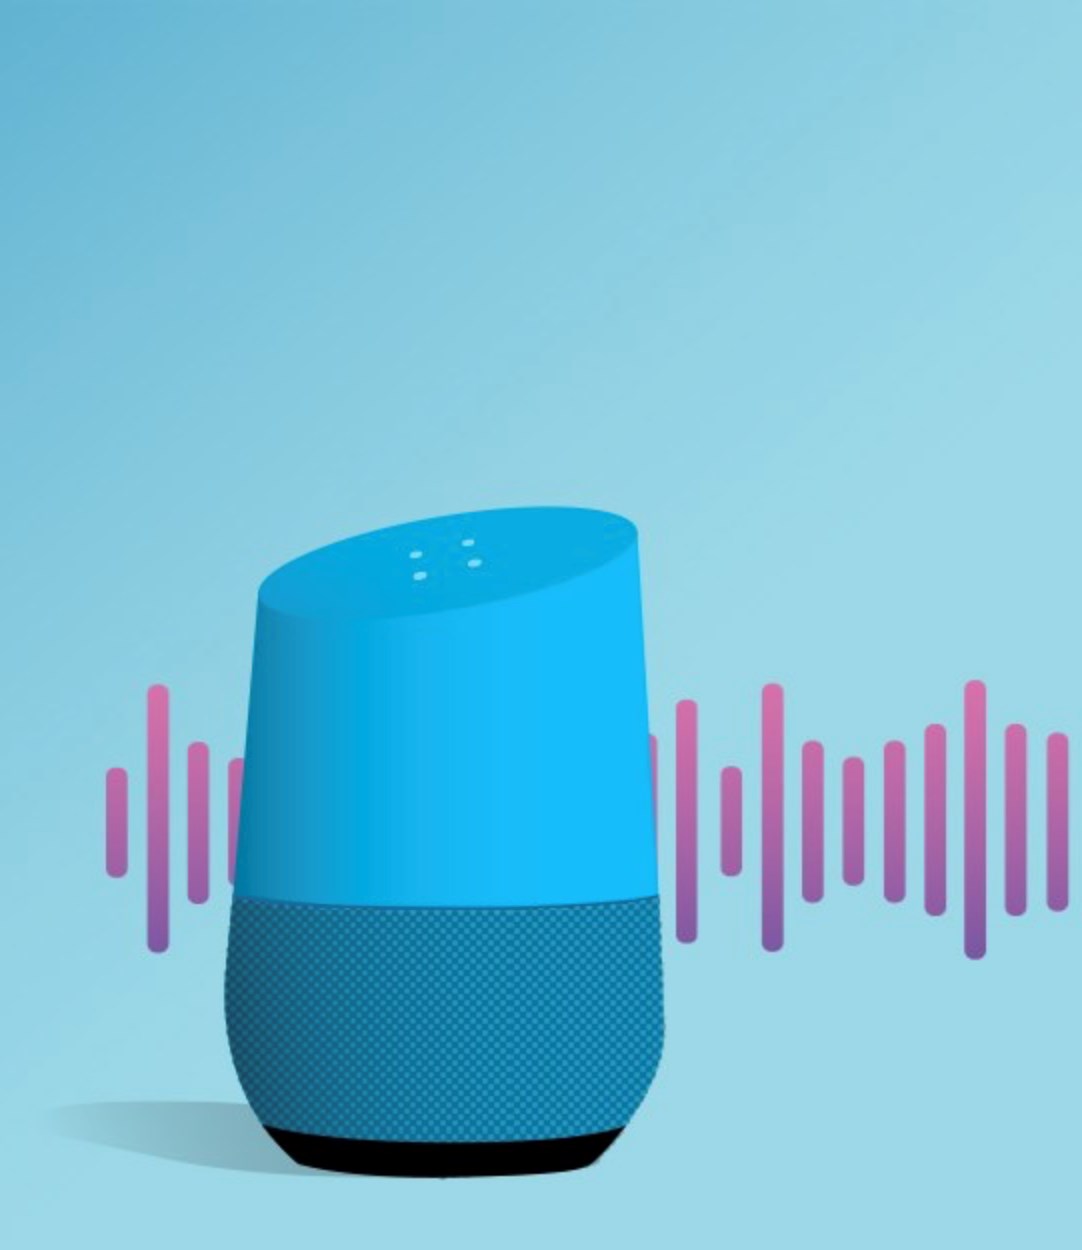 Conversational interfaces, voice & smart speakers. Our future?